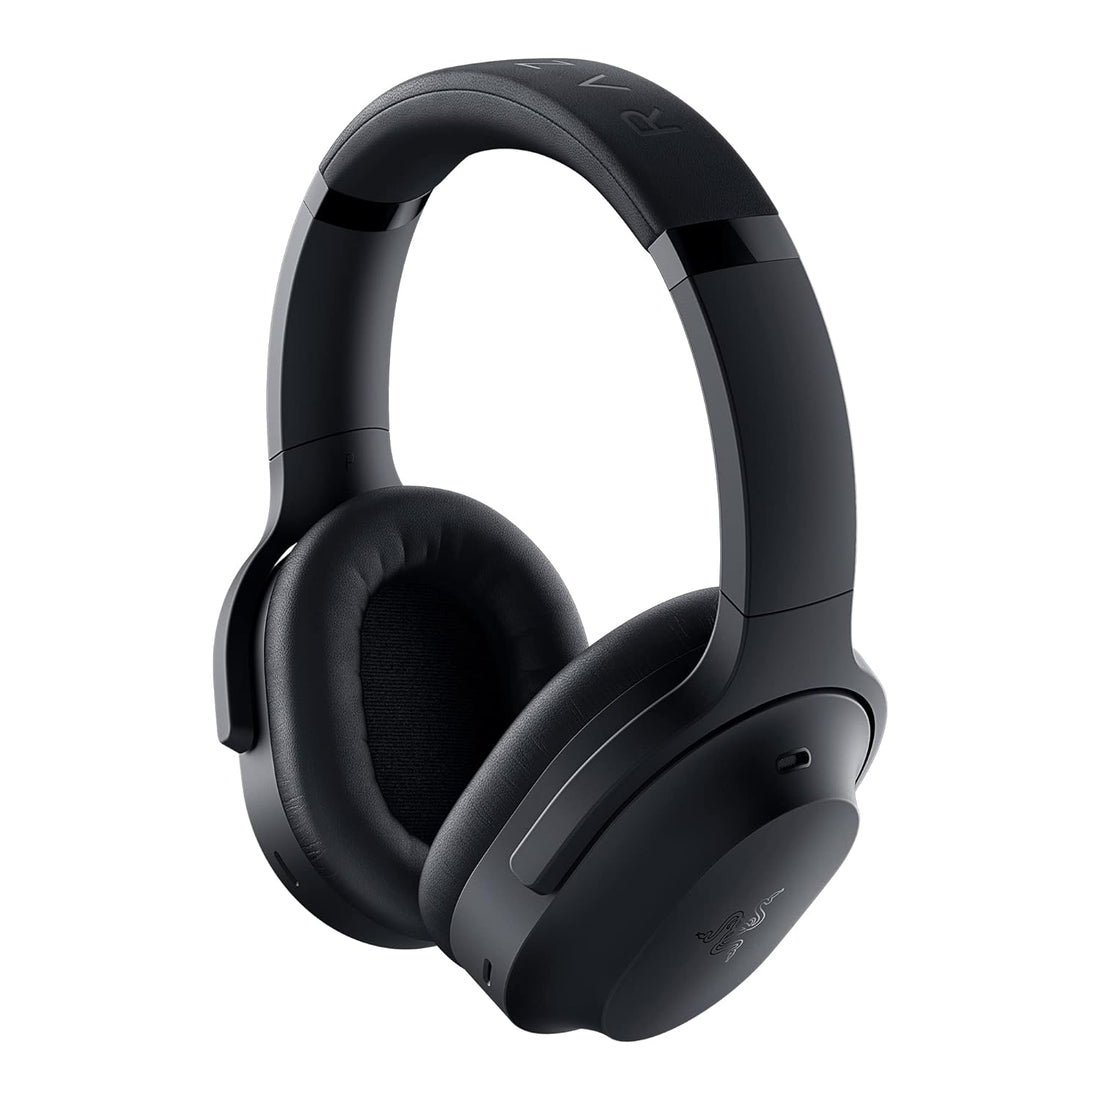 Razer Barracuda Pro Wireless Gaming&Mobile Headset (Pc,Playstation,Switch,Android,iOS):Hybrid ANC- 2.4Ghz Wireless+ Bluetooth- THX Aaa-50Mm Drivers- Mic-40Hr Battery-Black-Rz04-03780100-R3M1,Over Ear